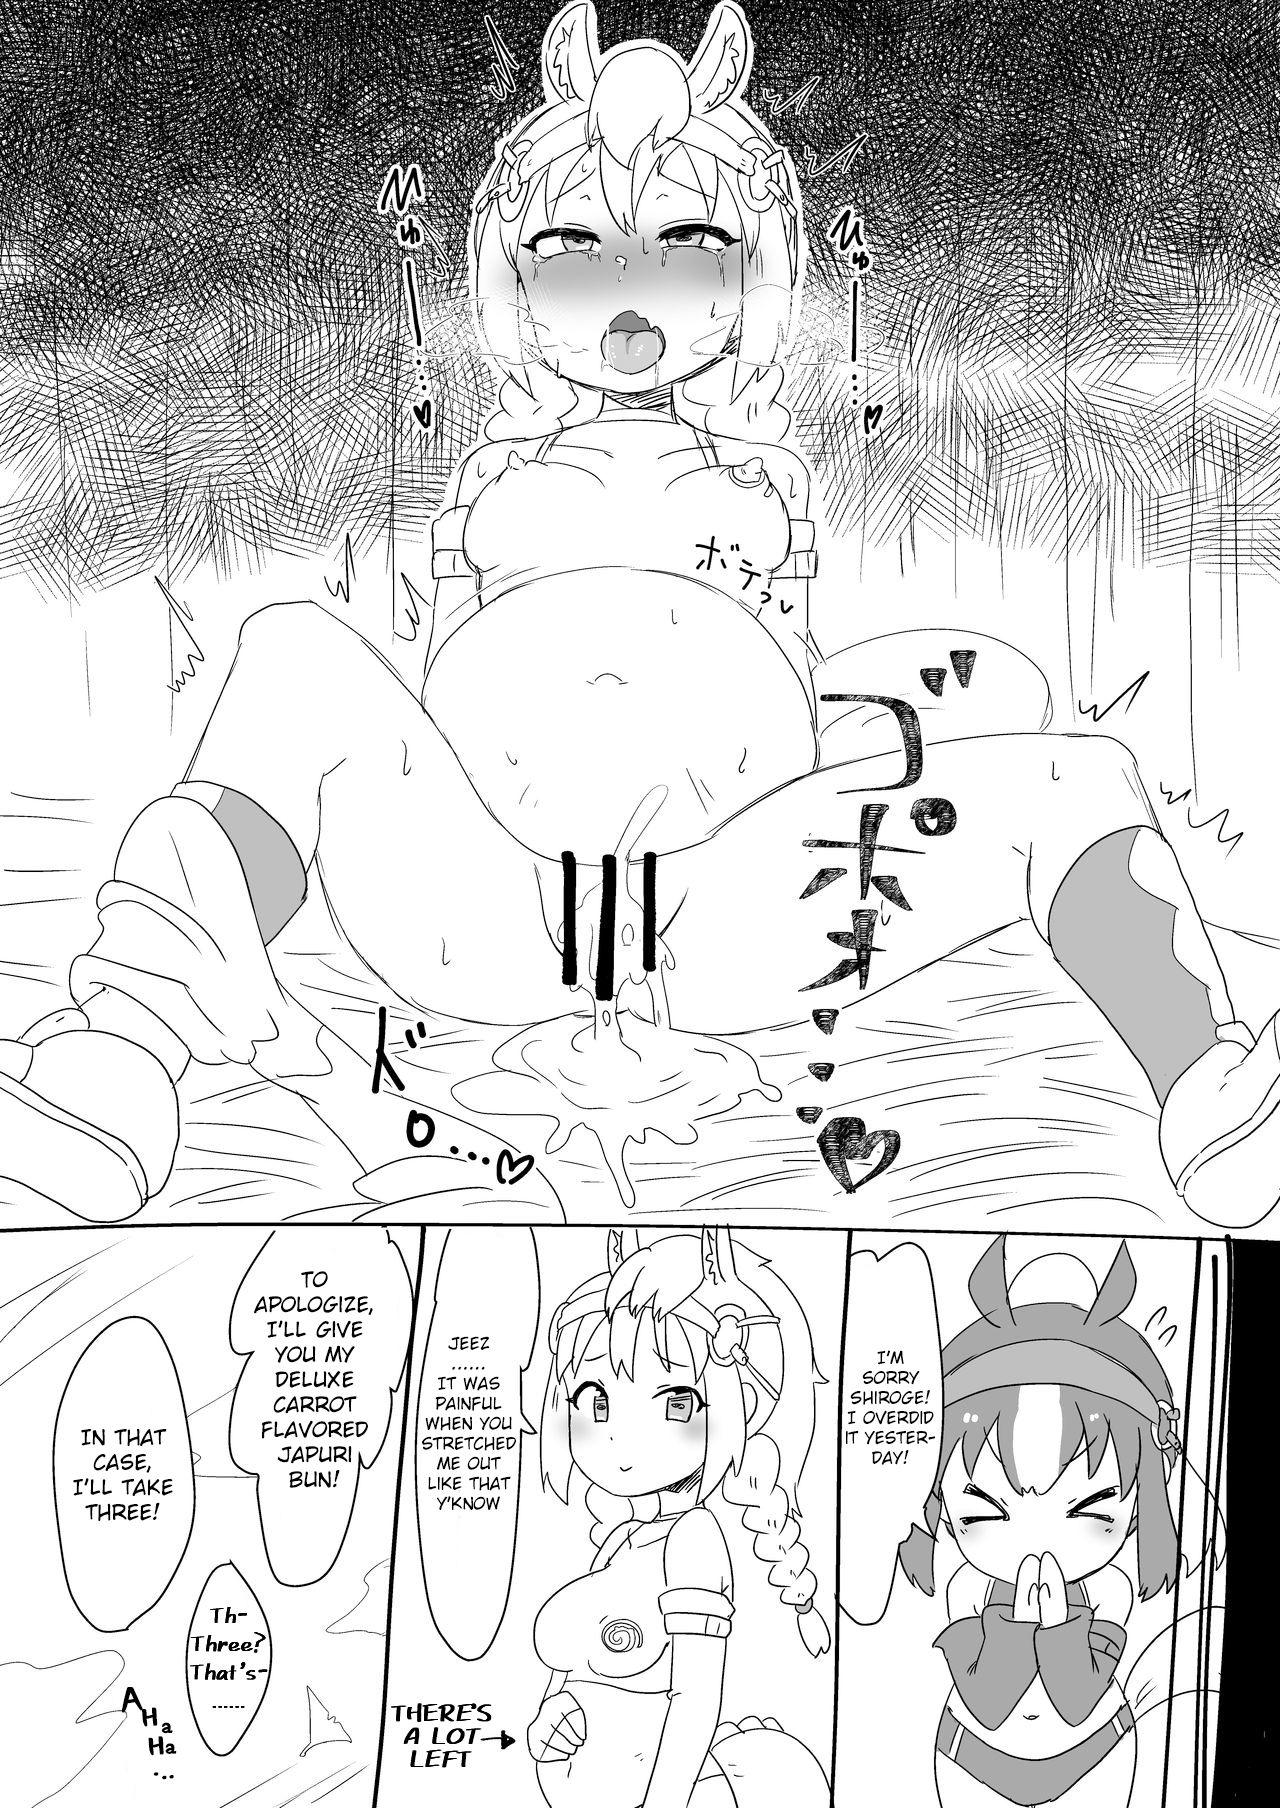 Special Locations Ten Takaku Thoroughbred Majiwaru Aki | The Sky Is High And The Thoroughbreds Are Copulating In Autumn - Kemono friends Big - Page 13